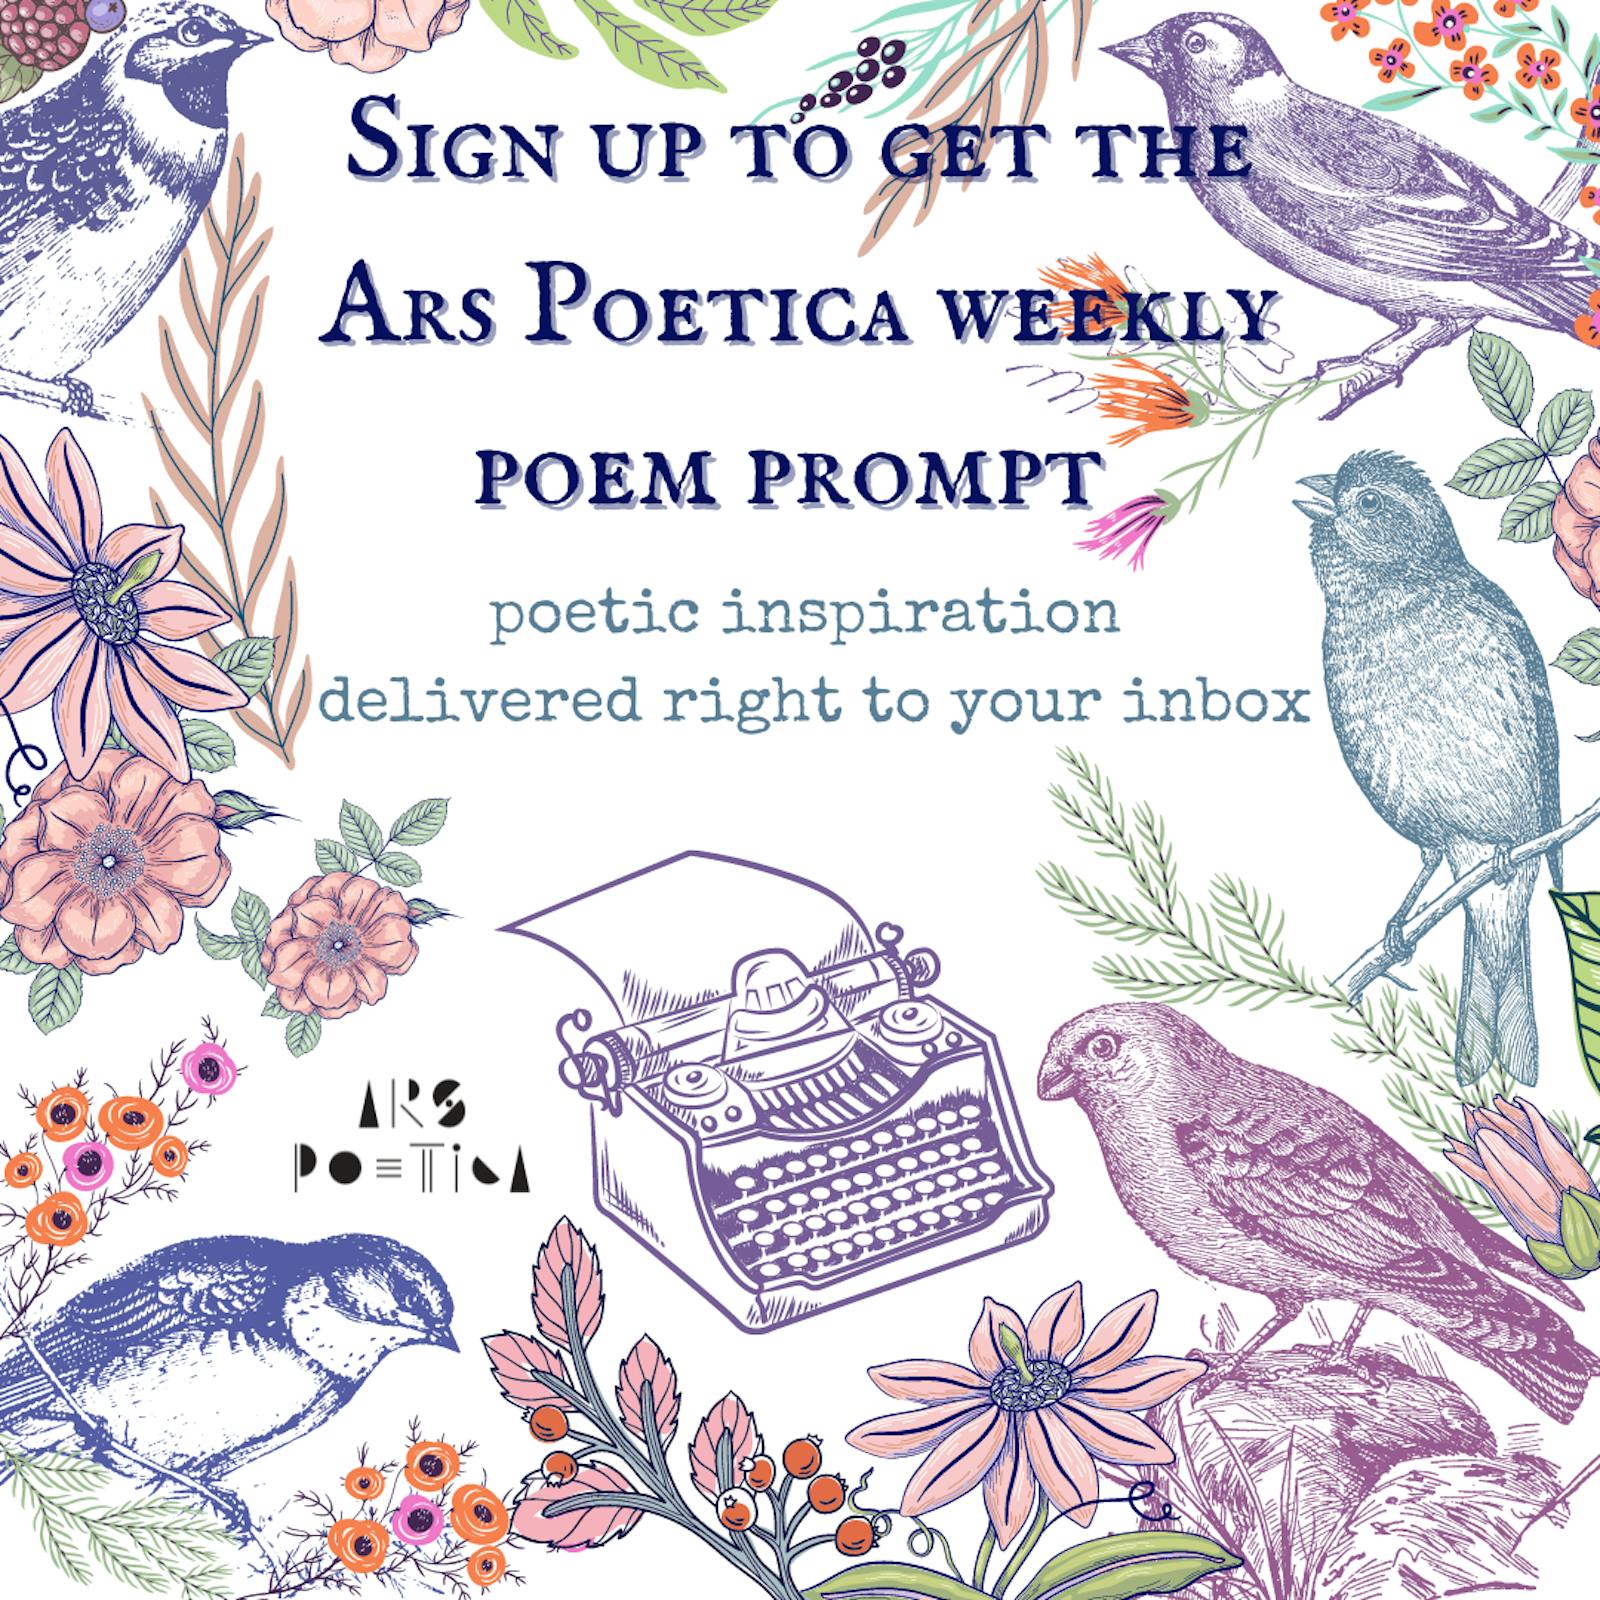 Sign up to get weekly poem prompts!